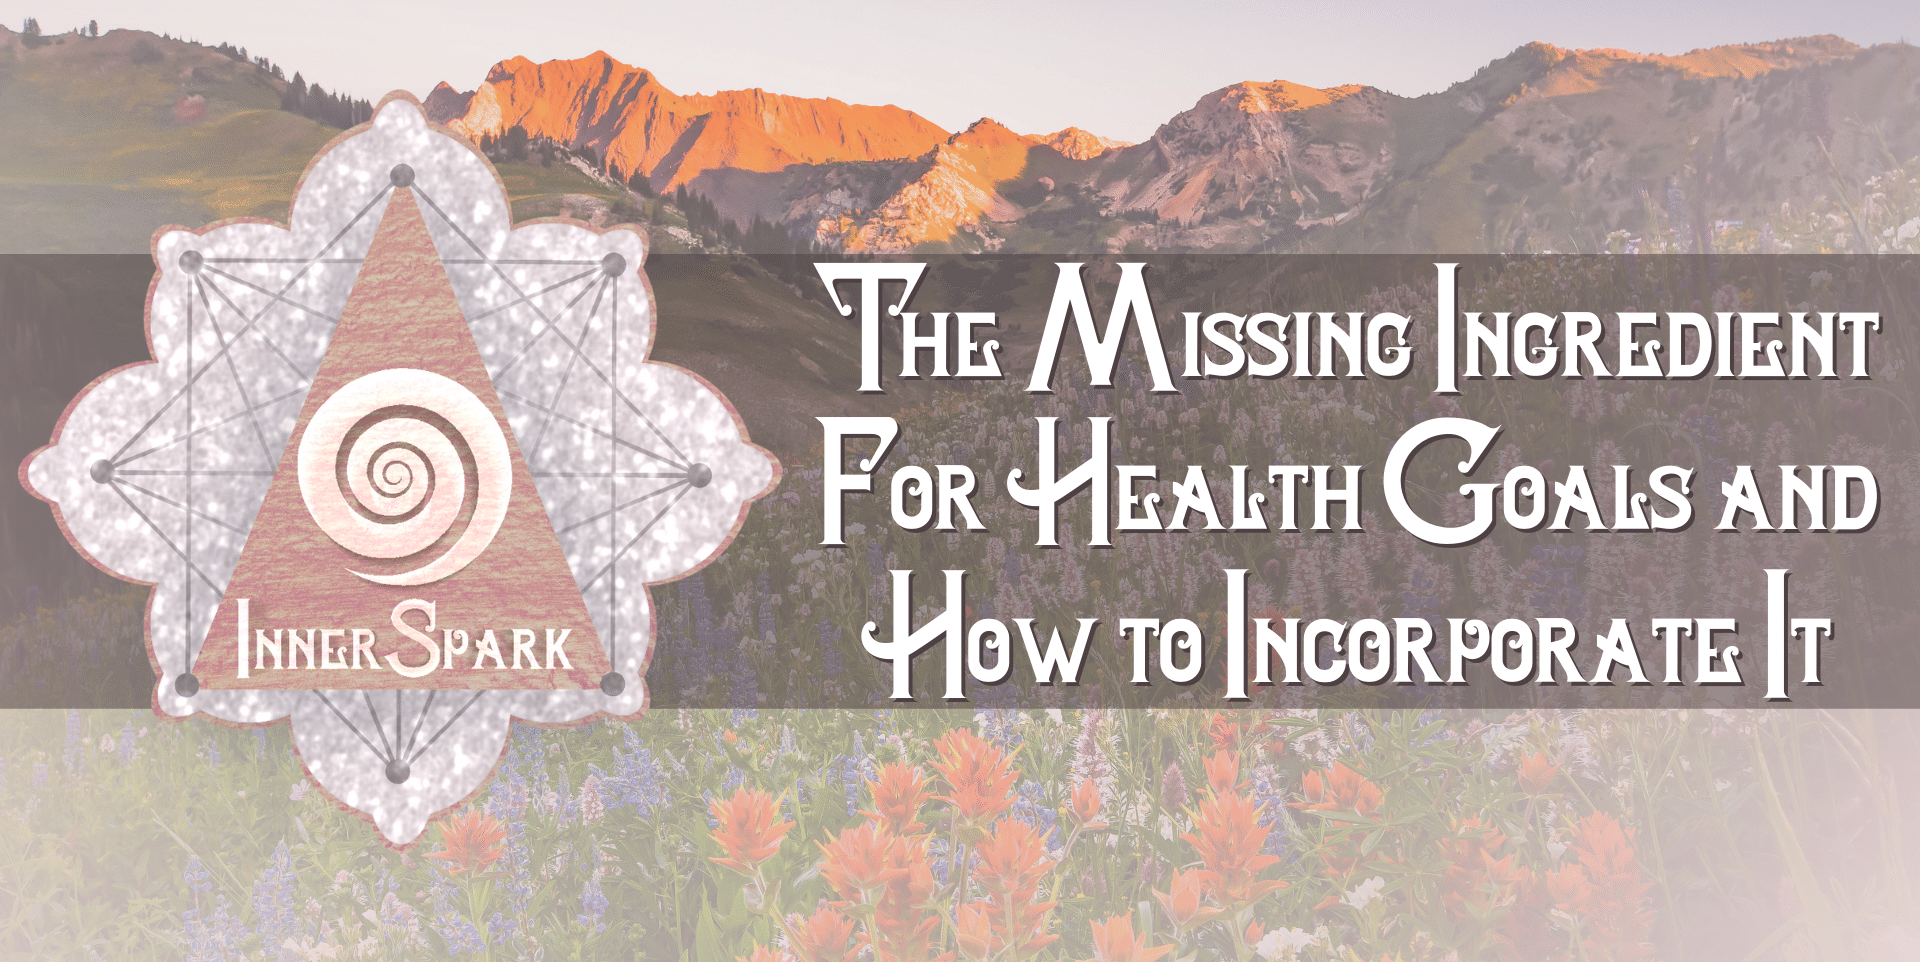 The Missing Ingredient For Health Goals and How to Incorporate It